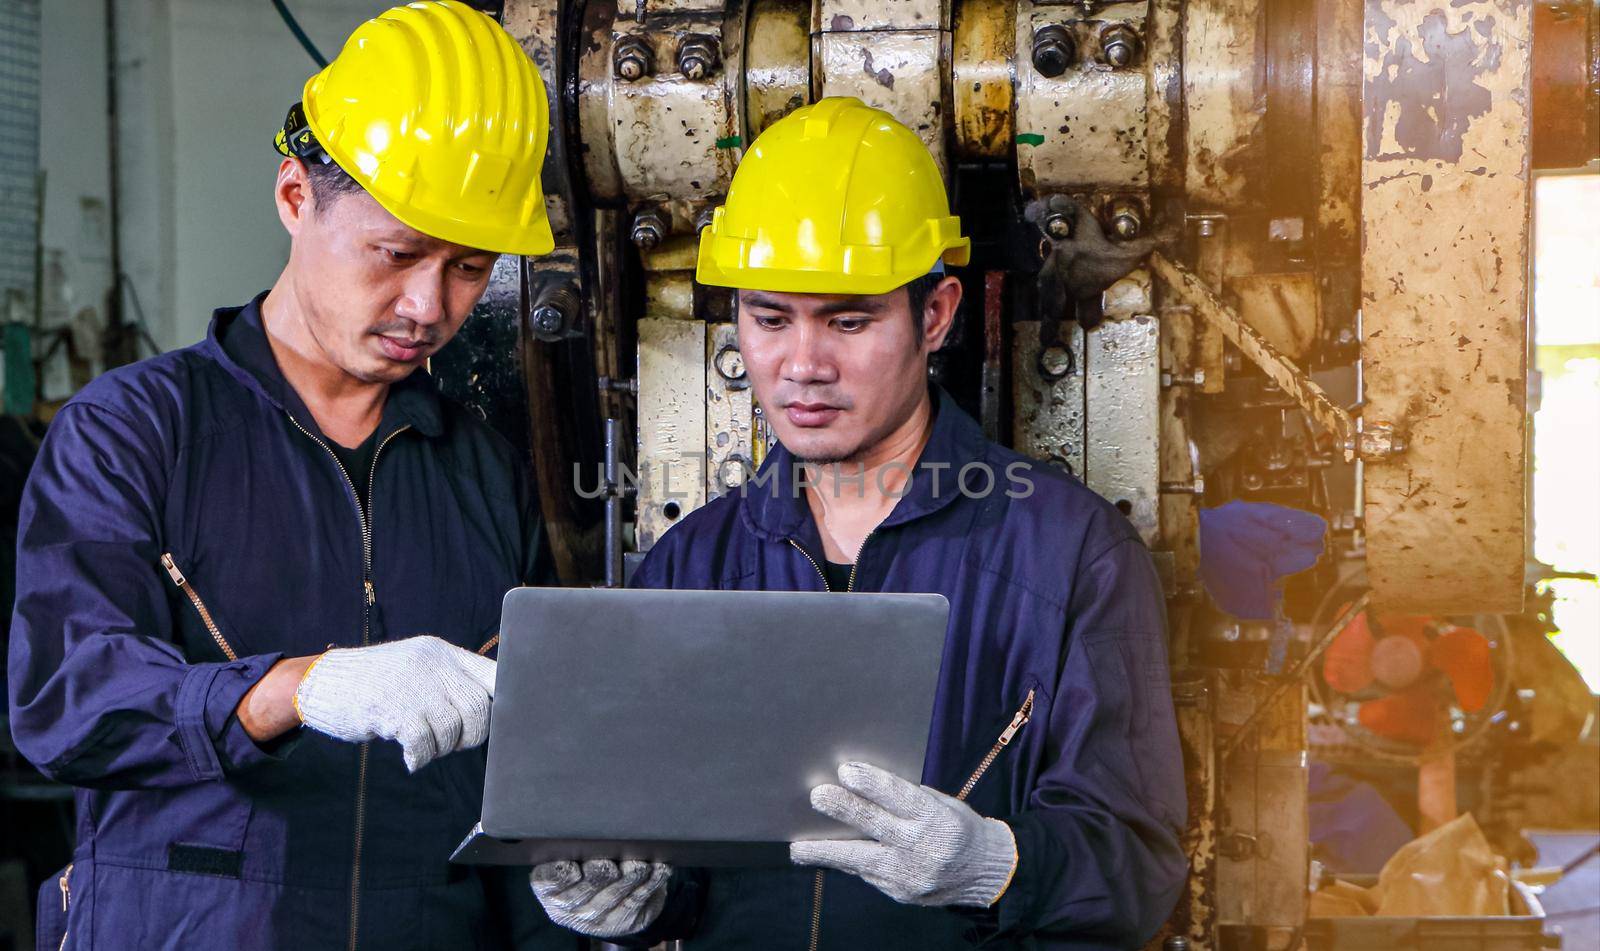 Two skilled Asian workers, dressed in helmet uniforms, were using a computer. by atitaph